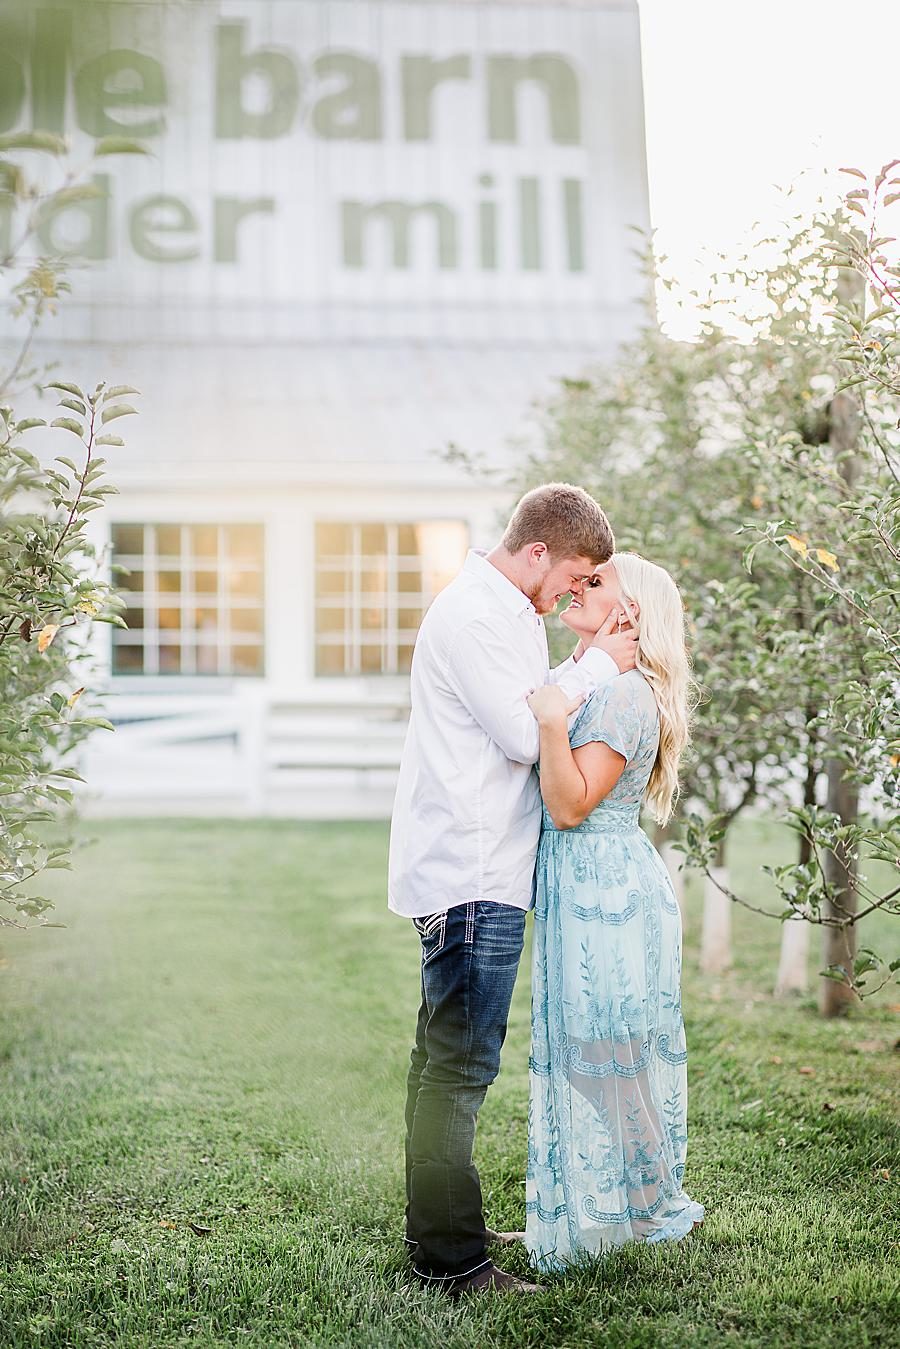 Kisses at this Apple Barn engagement by Knoxville Wedding Photographer, Amanda May Photos.